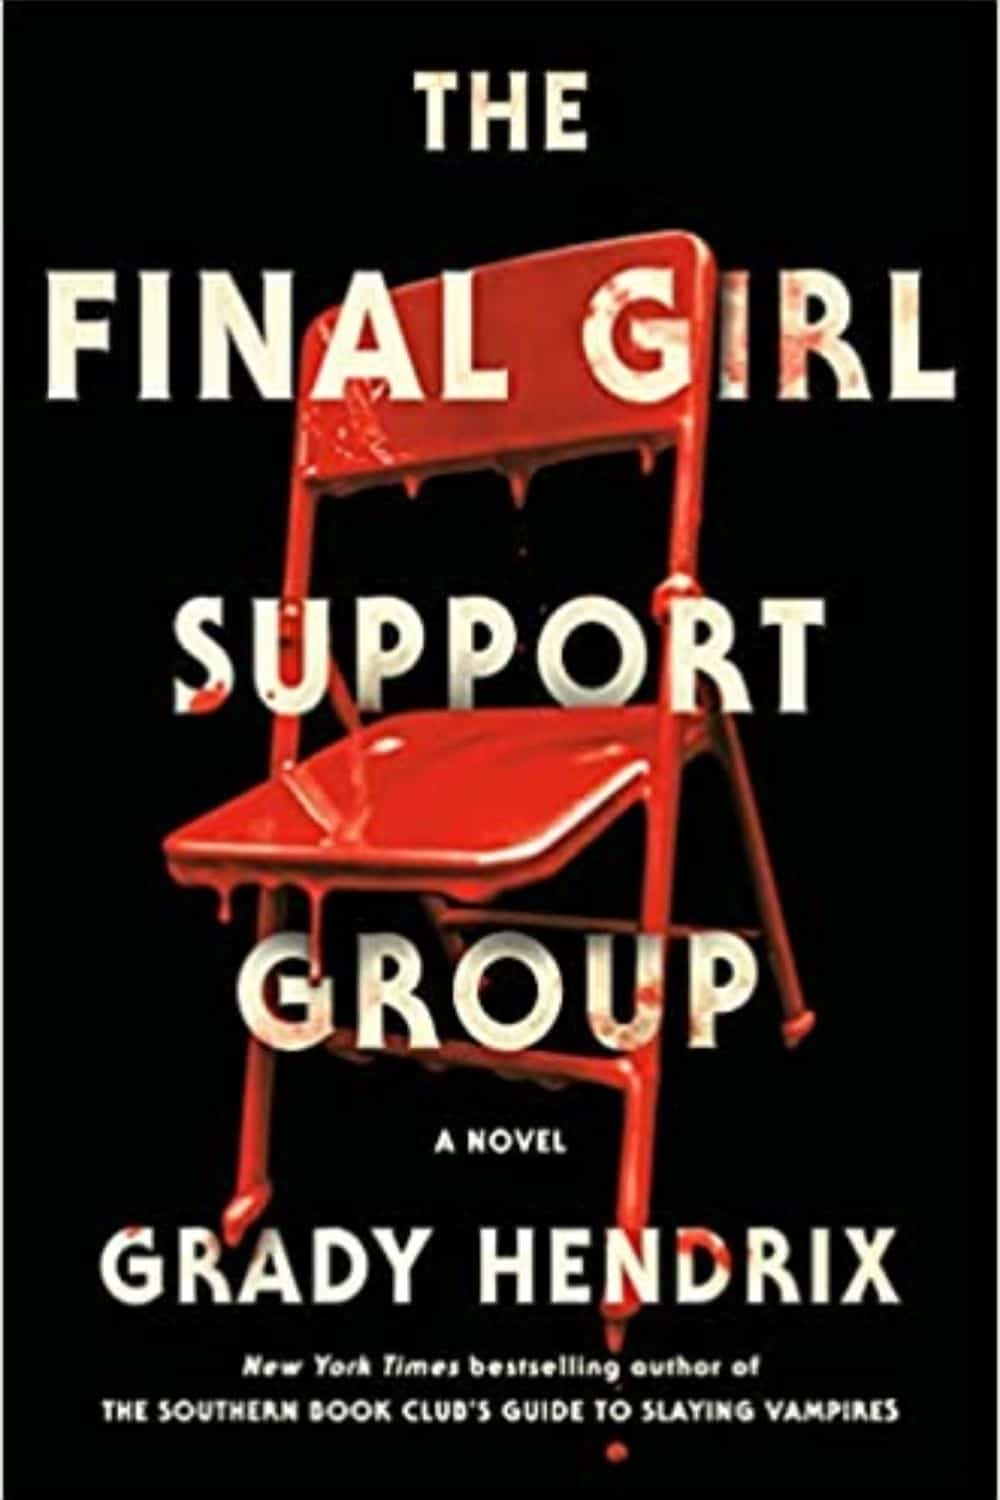 The Final Girl Support Group By Grady Hendrix Is A Good Horror Thriller